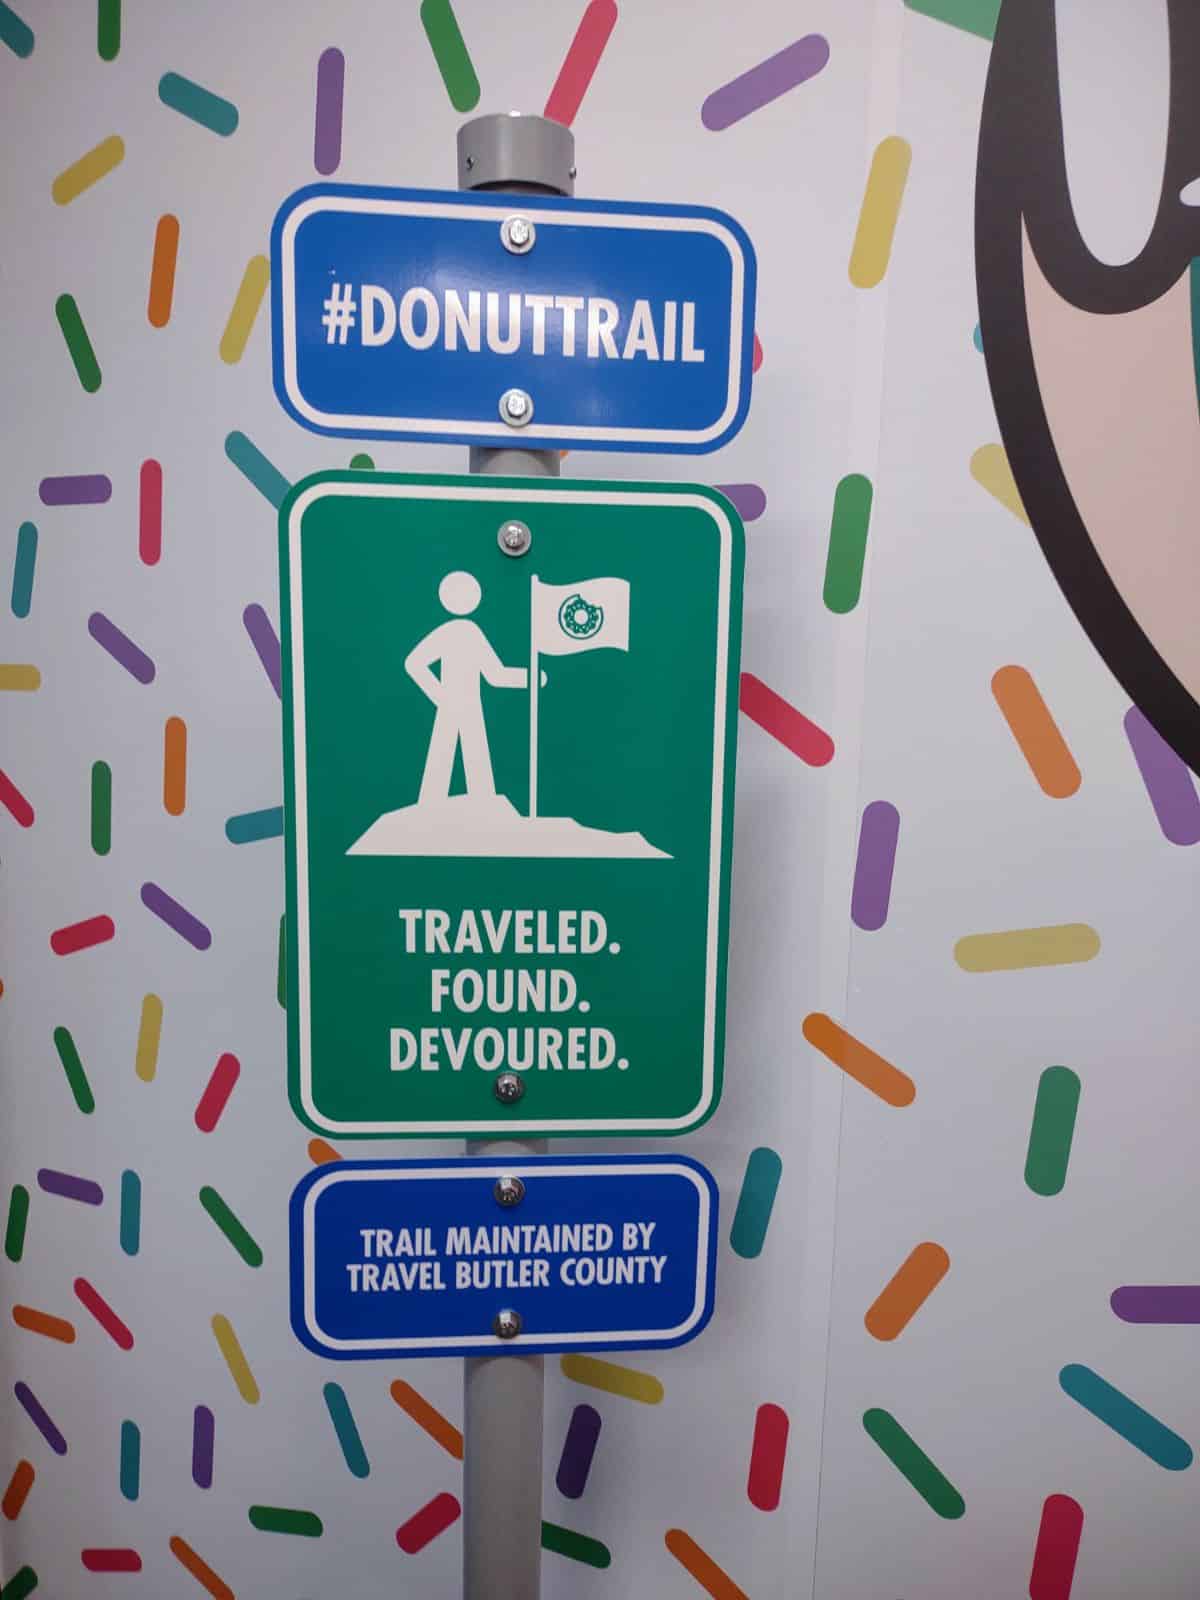 A donut trail sign made to look like a hiking sign.